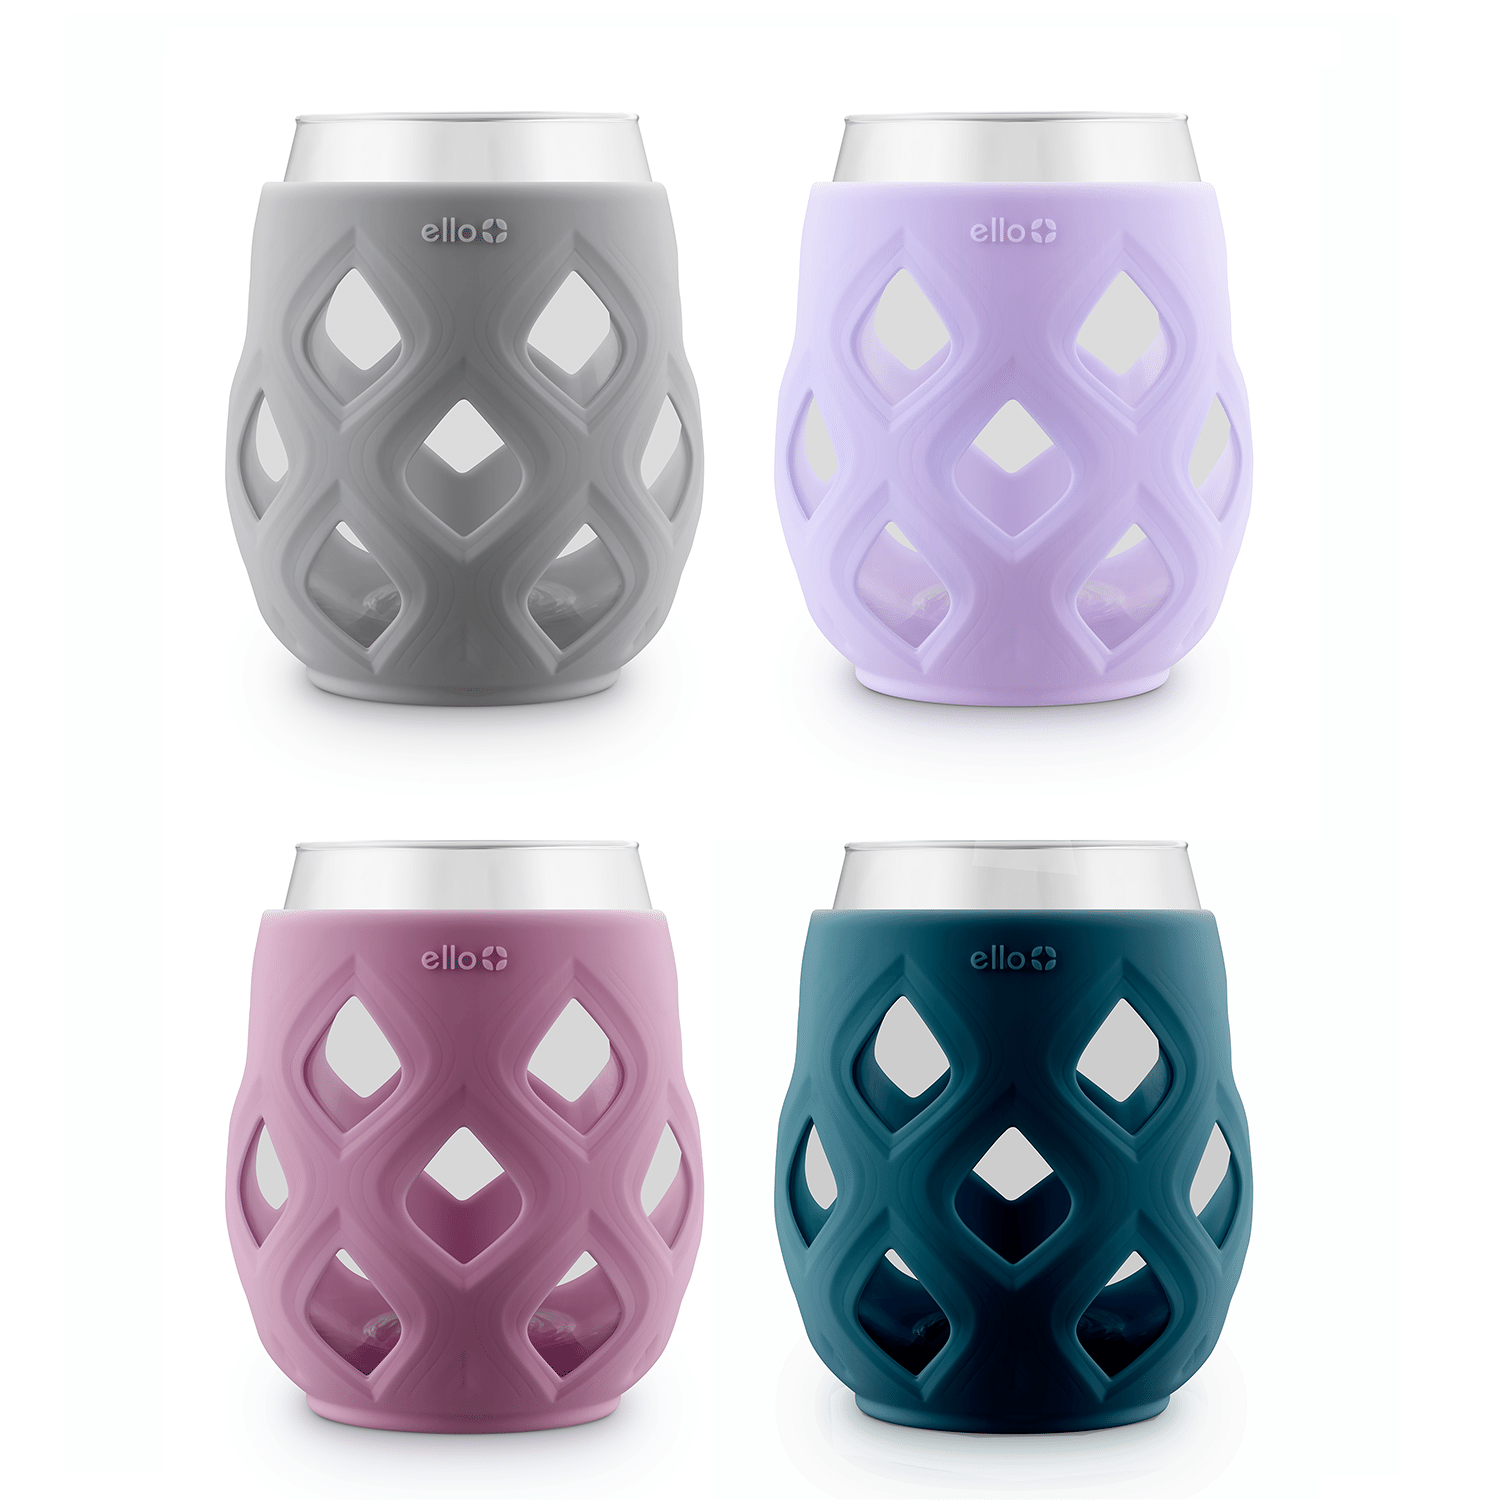 True Silicone Wrapped Wine Glasses, Stemless Glass Tumblers, Dishwasher  Safe Drinkware, 16 Oz Multicolor Set of 4